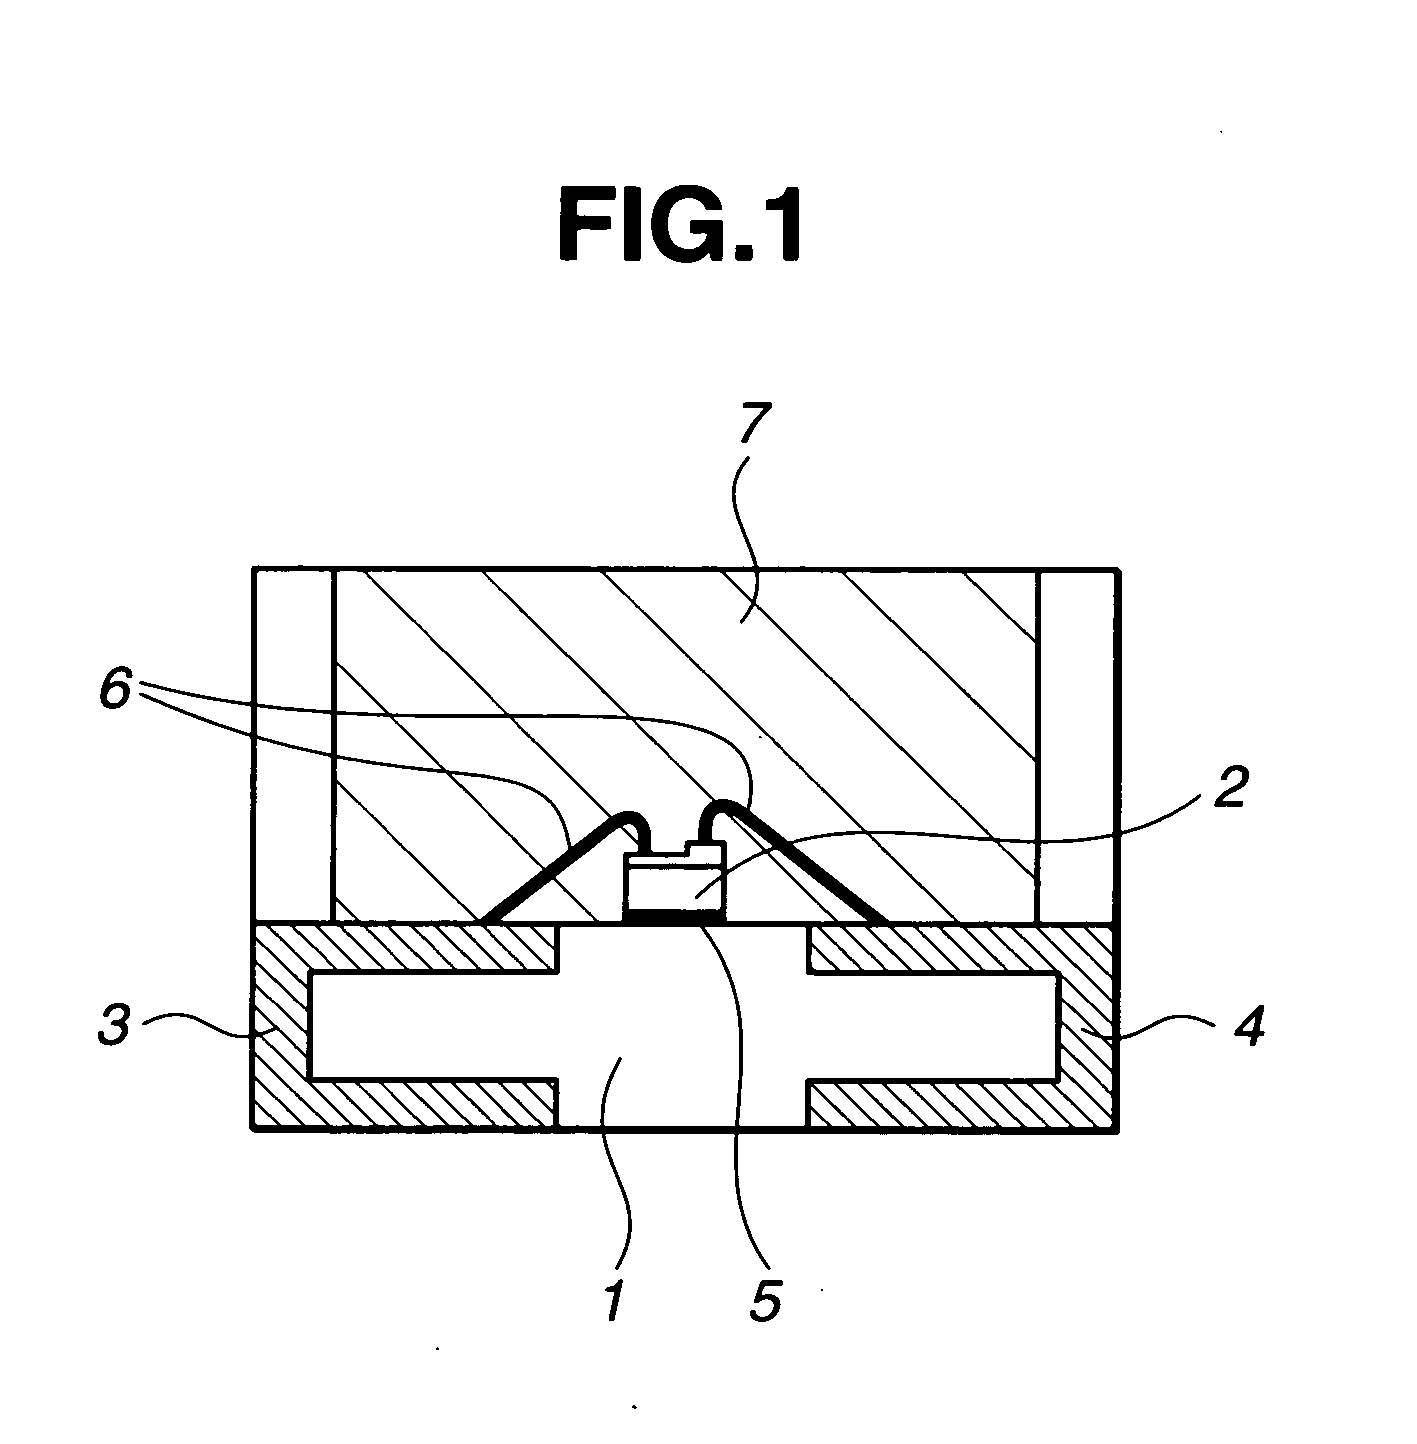 Preparation of semiconductor device